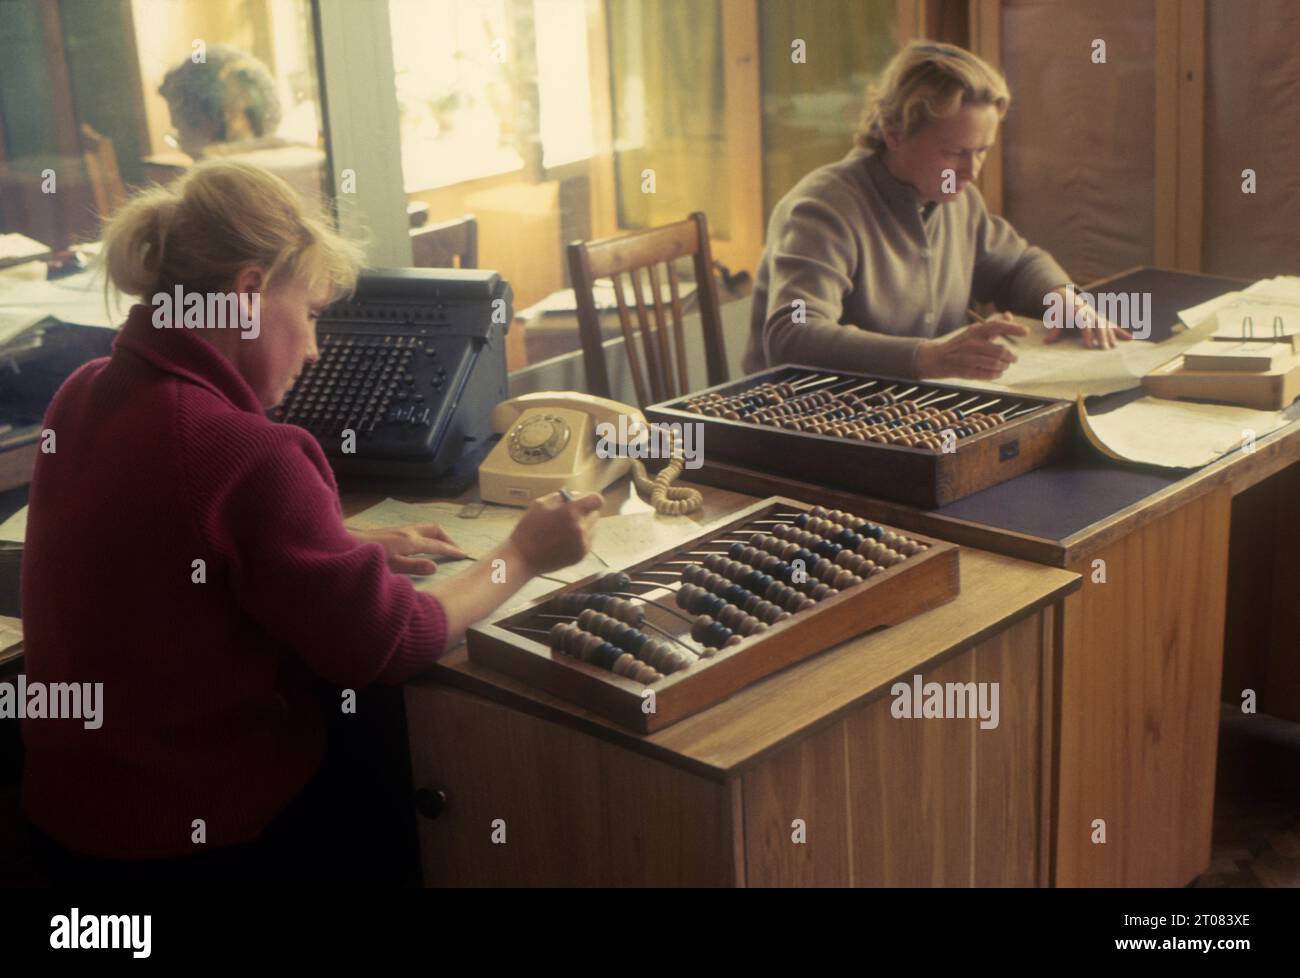 USSR, Russia. Women in office using abacus. Stock Photo